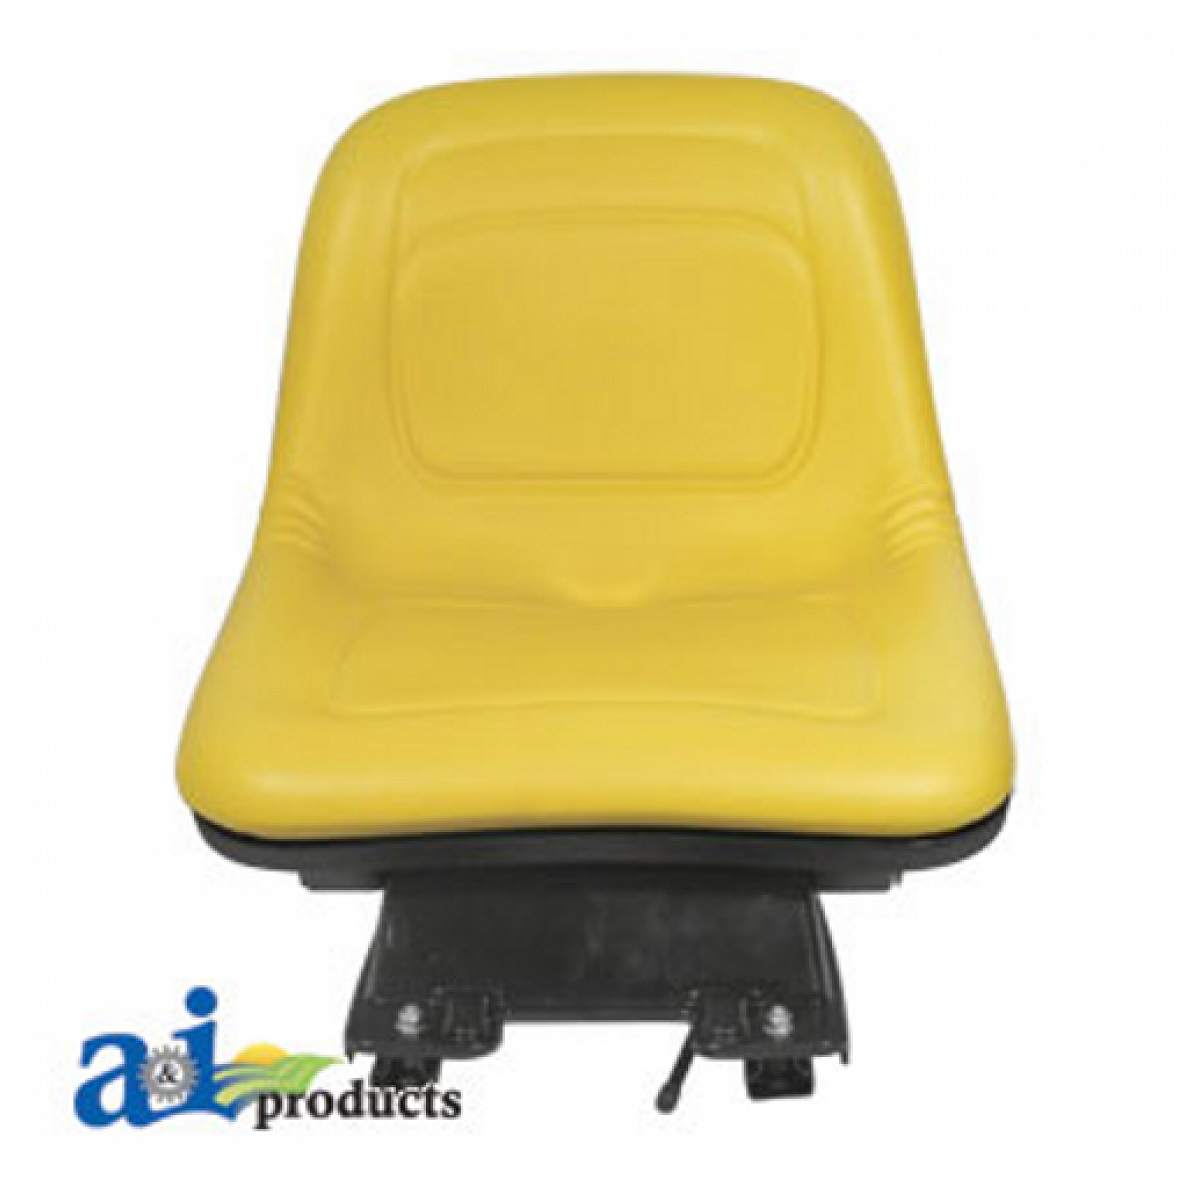 A & I Products AM131801 John Deere Riding Mower Tractor ...